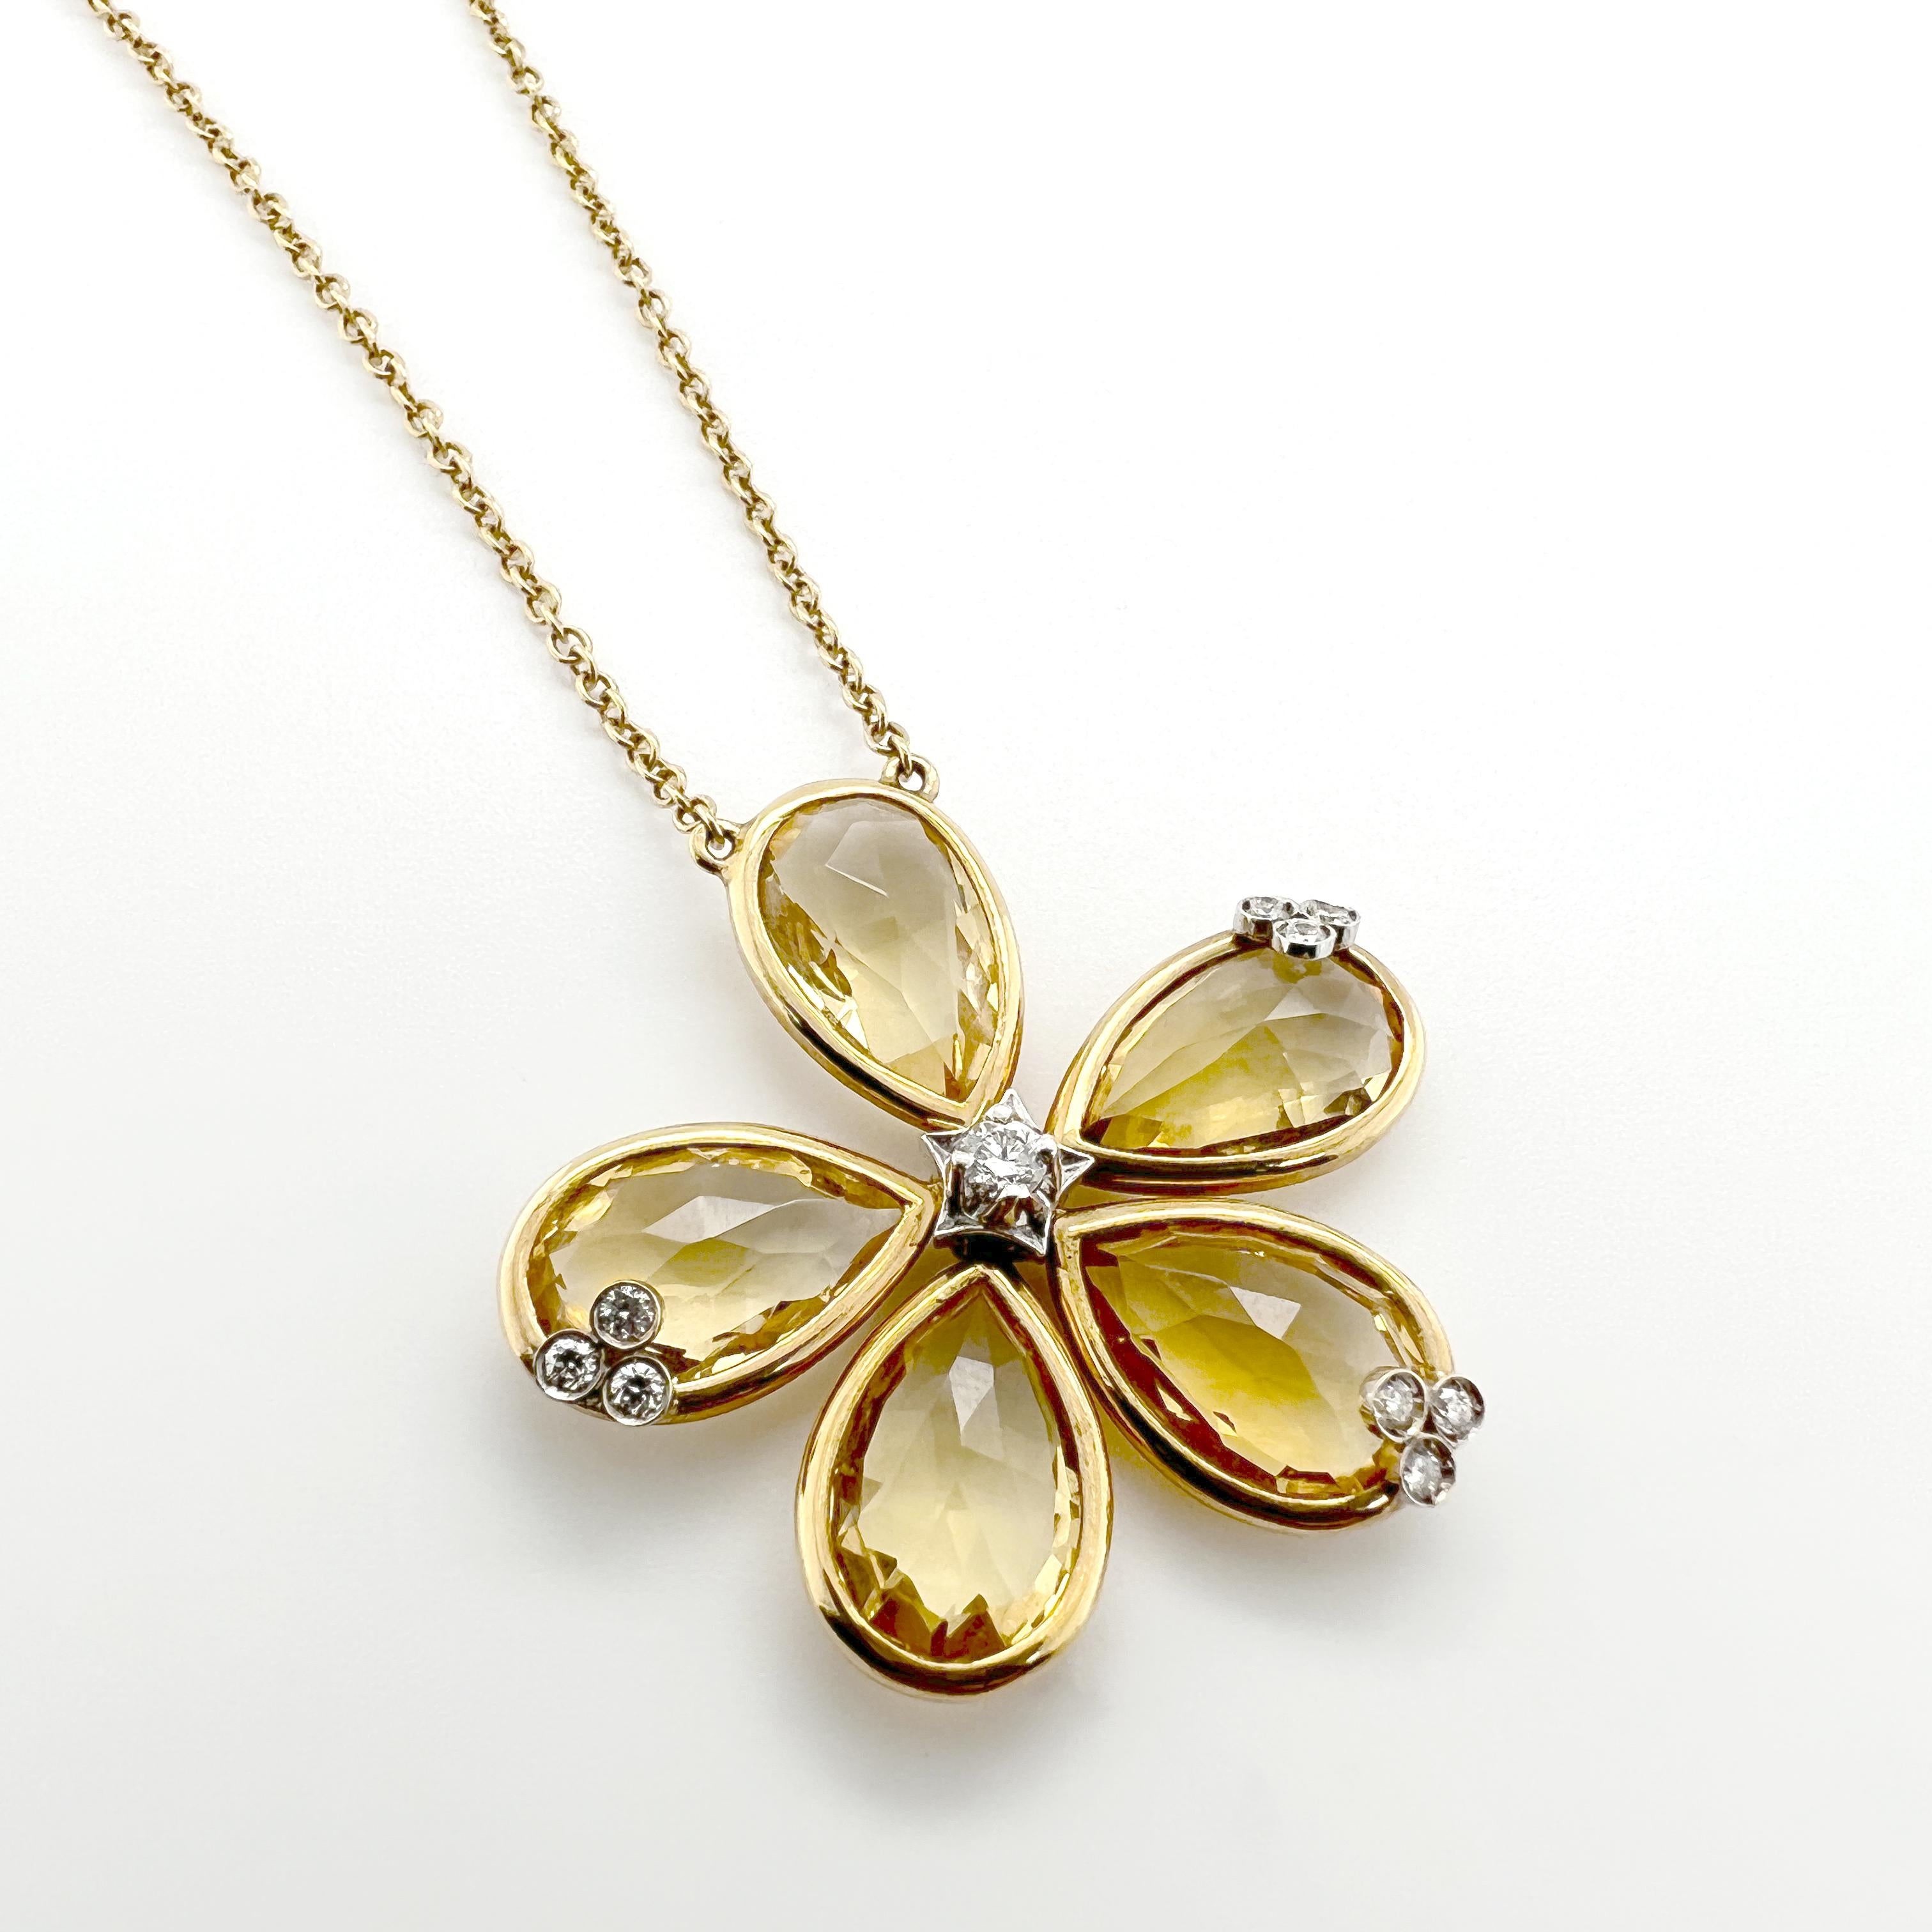 This 18kt gold necklace, part of the Bouquet collection, features a stunning flower pendant adorned with citrine quartz drops and diamonds. The flower design creates a delicate and feminine aesthetic that adds a touch of elegance to any outfit. The